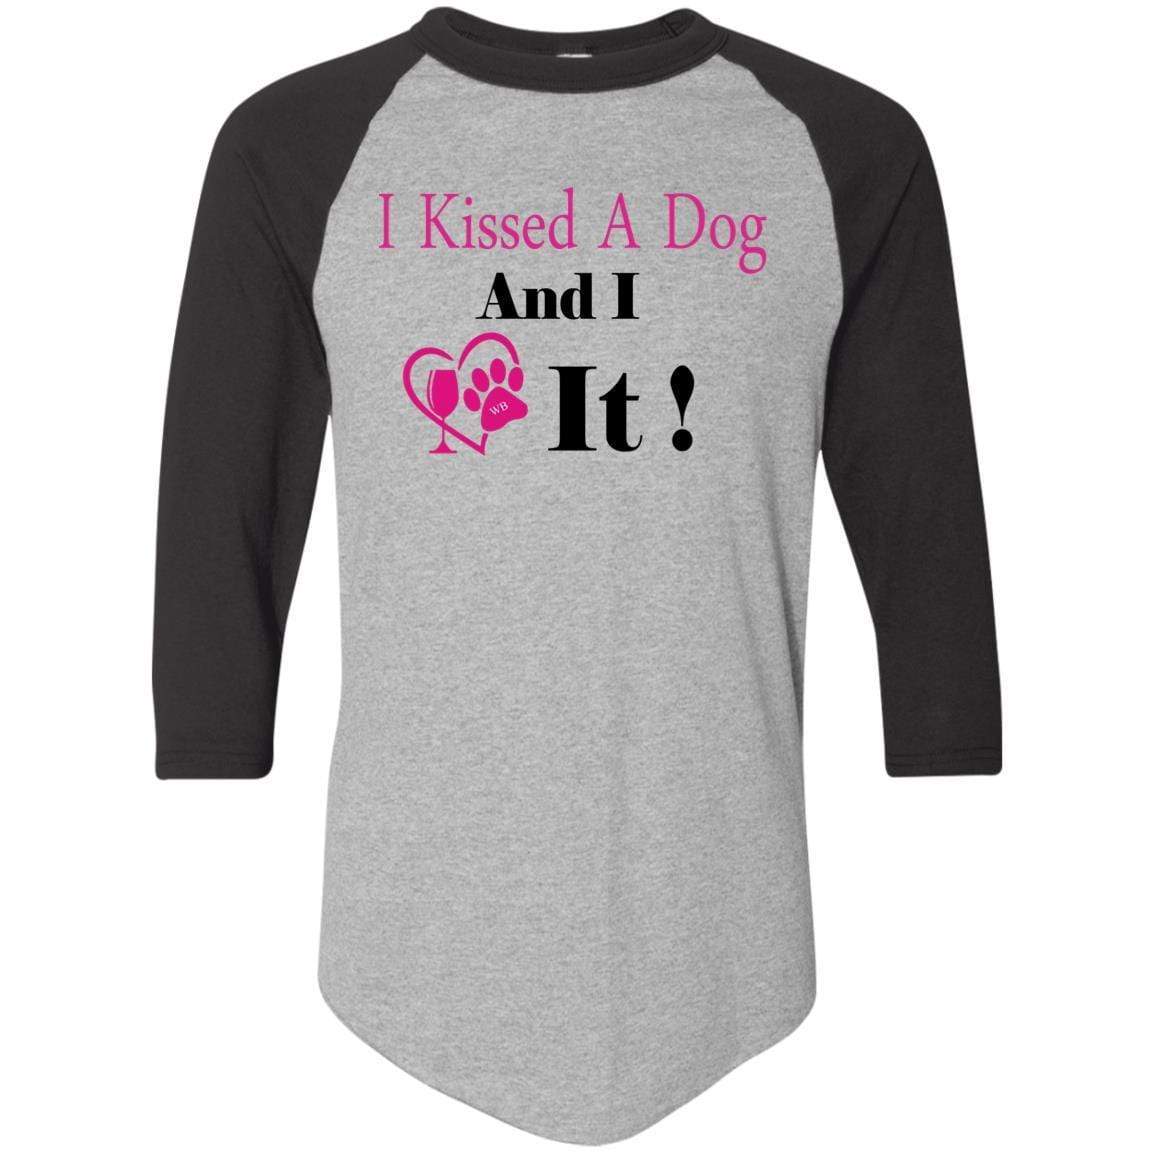 T-Shirts Athletic Heather/Black / S WineyBitches.co "I Kissed A Dog And I Loved It:" Colorblock Raglan Jersey WineyBitchesCo